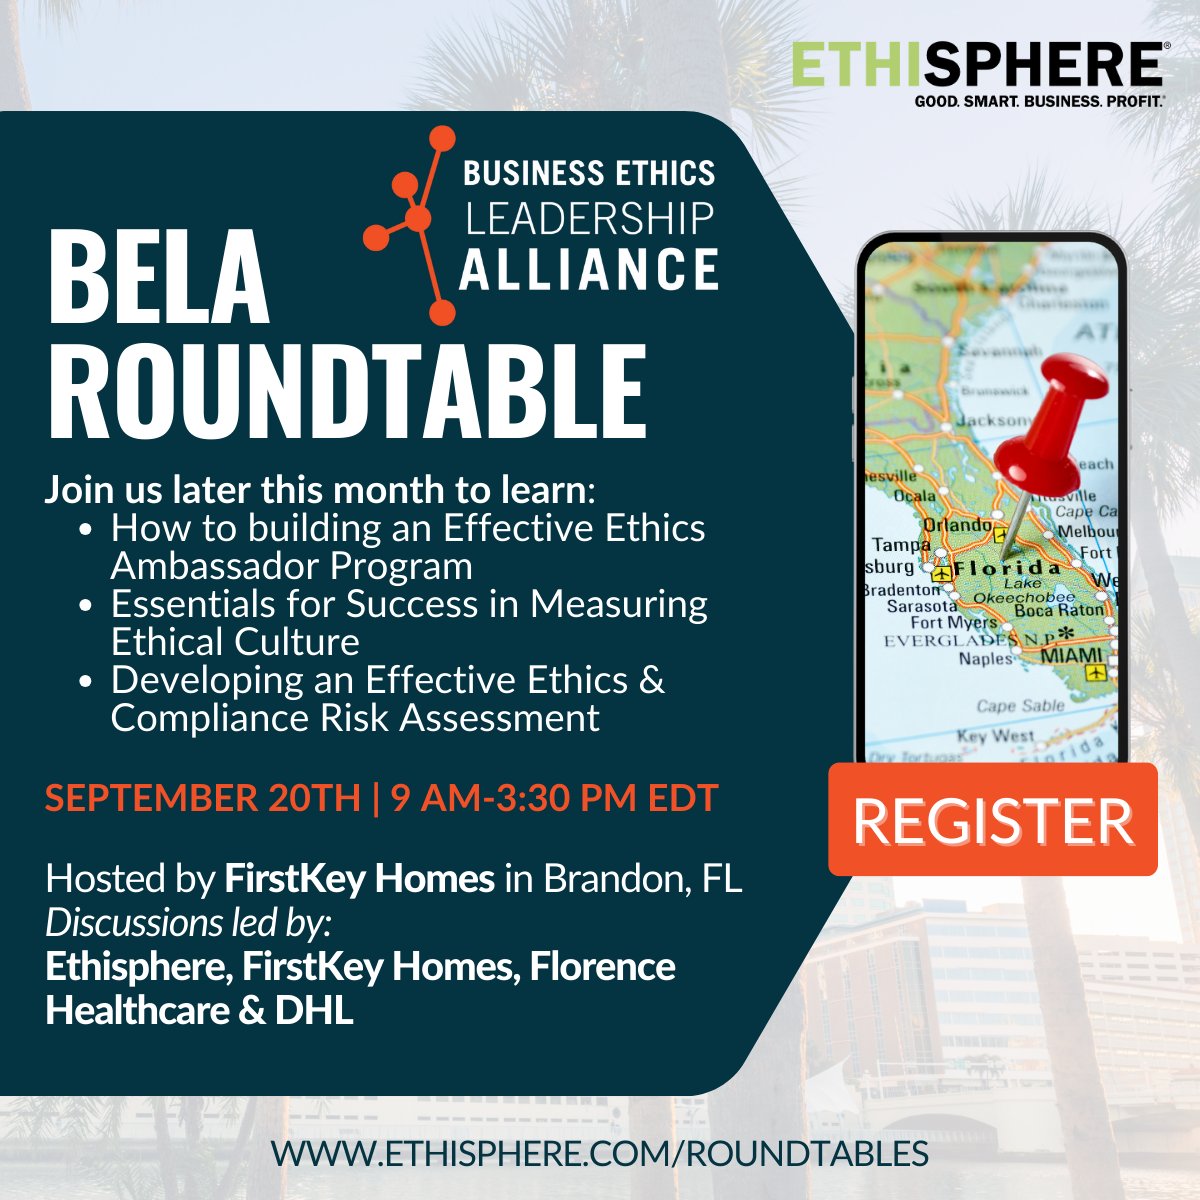 Attention Central Florida - the search for local E&C events is over! Join us on September 20th for an in-person roundtable discussion. ***Limited seats are available, so register today.*** bit.ly/469VLY4 #ethics #compliance #culture #risk #business